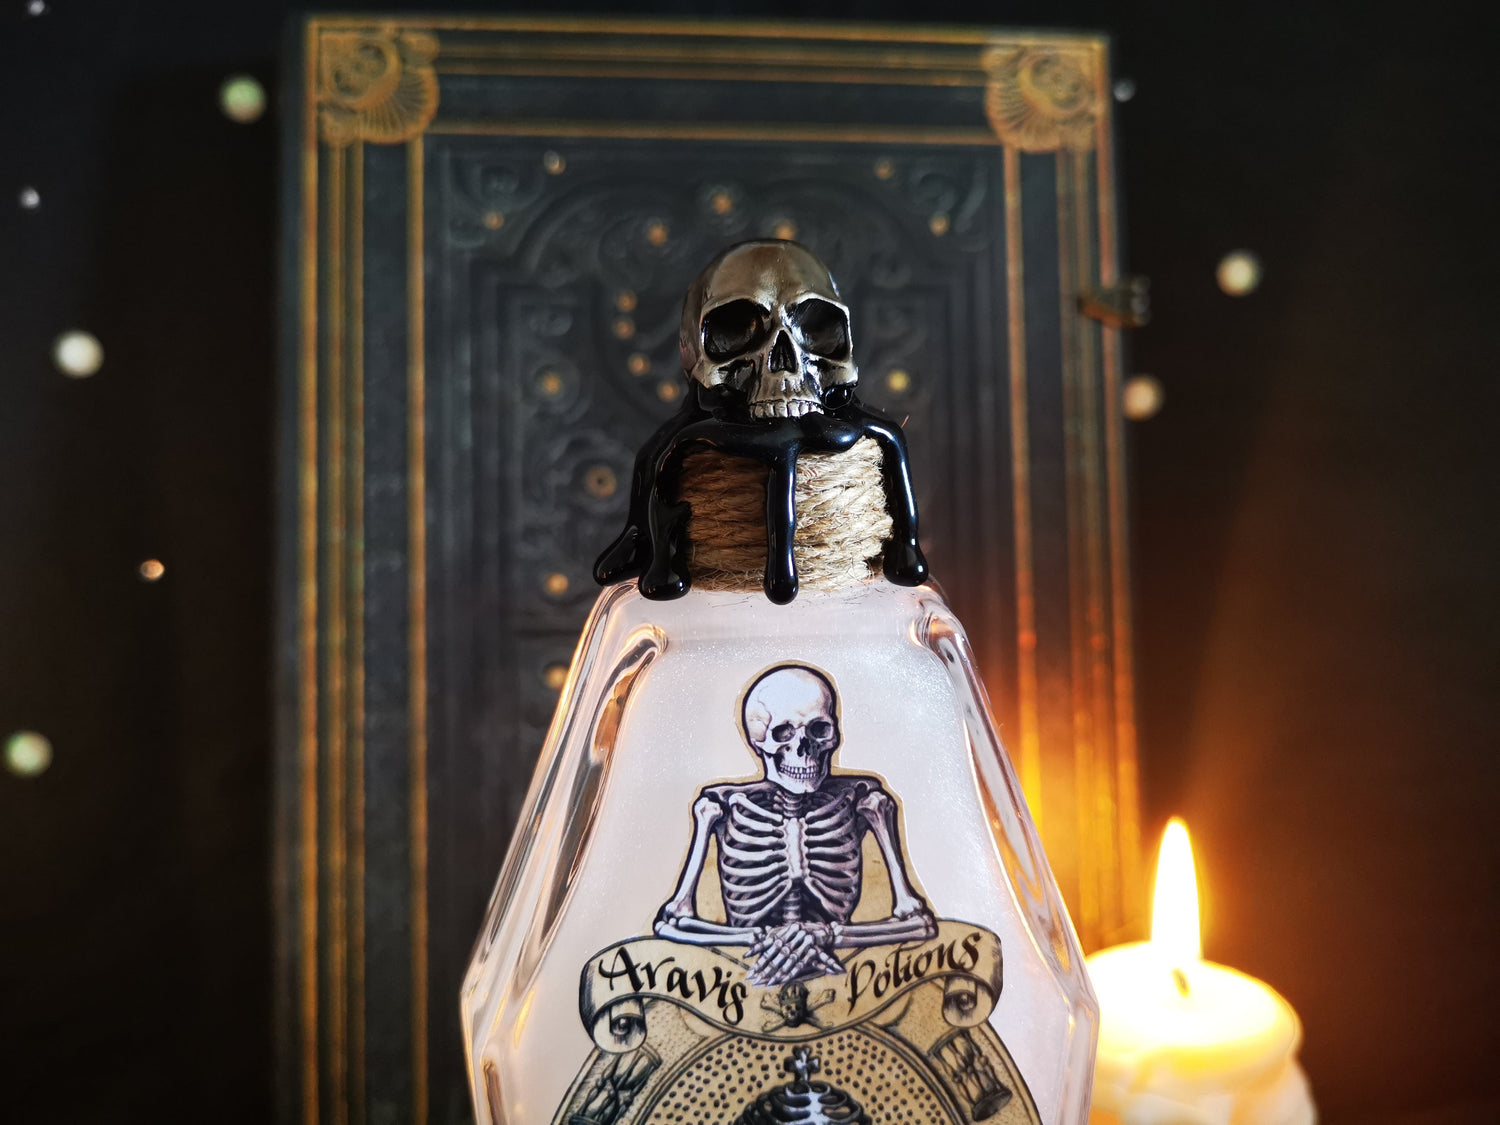 Skele-gro Aravis Potions Apothecary Harry Potter